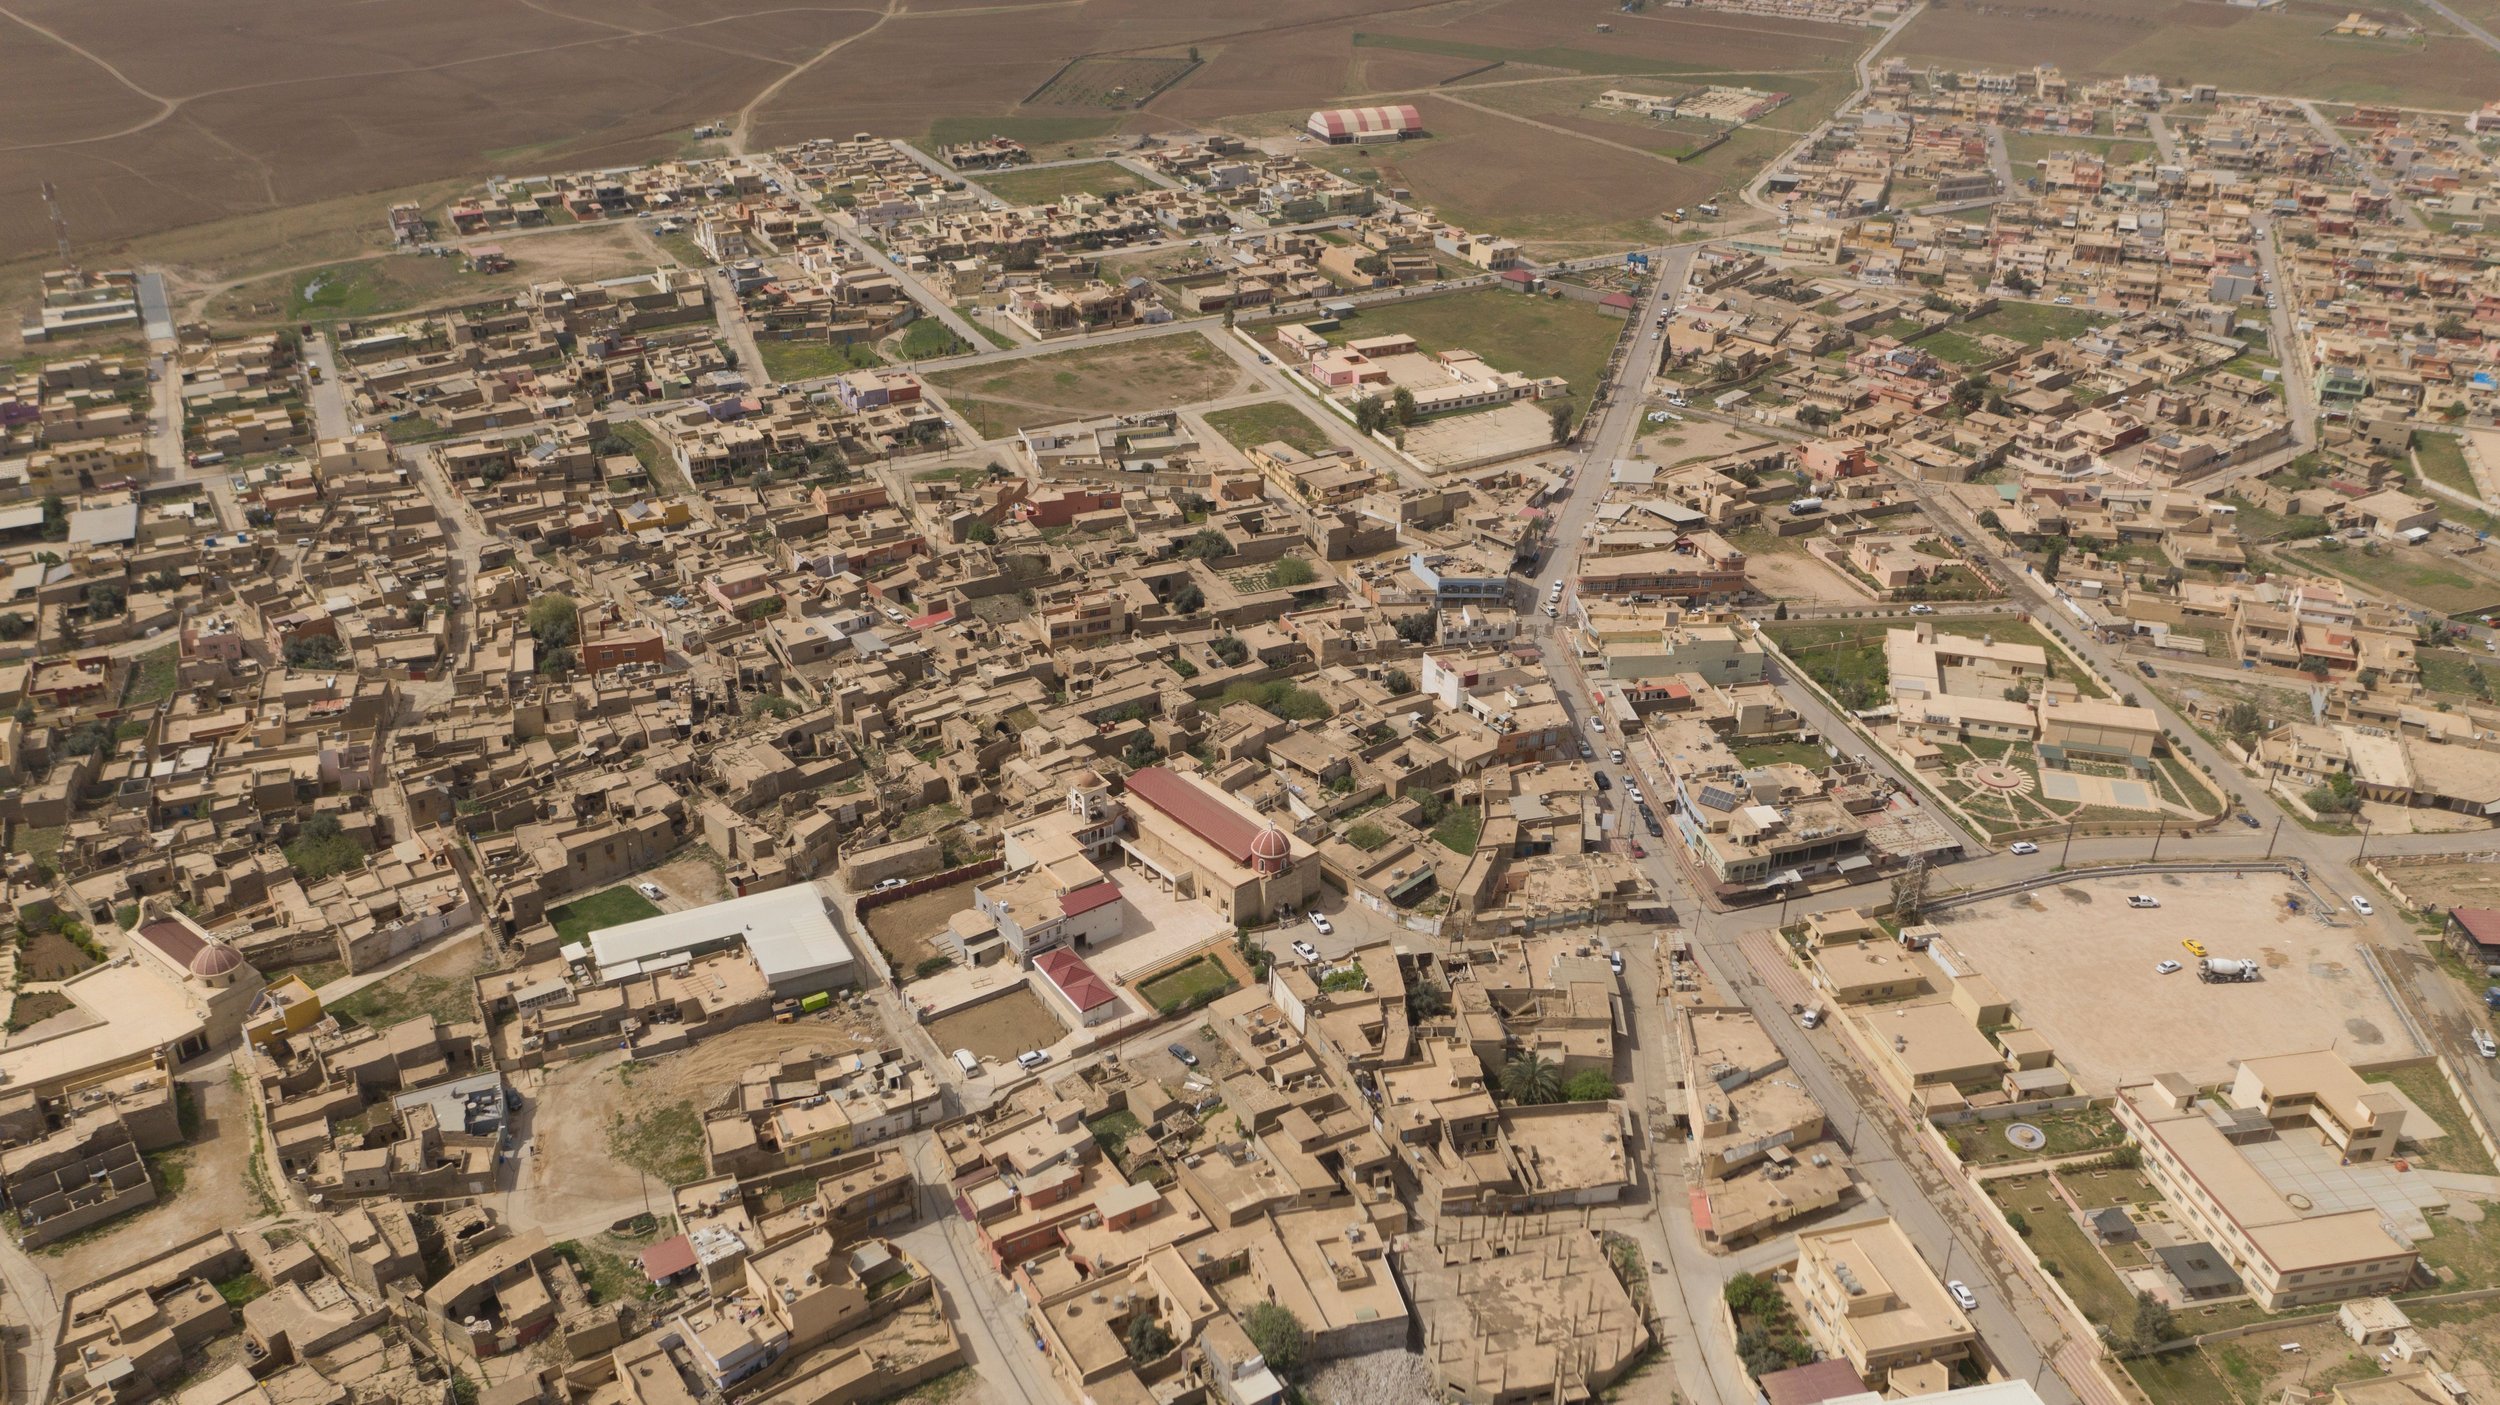  An aerial shot of Tesqopa. In the early part of the millennium, it received many refugees from Baghdad and Mosul who were caught up in the wake of conflict. Tesqopa was the target of ISIS in 2014 but the Kurdish Peshmerga retook the village shortly 